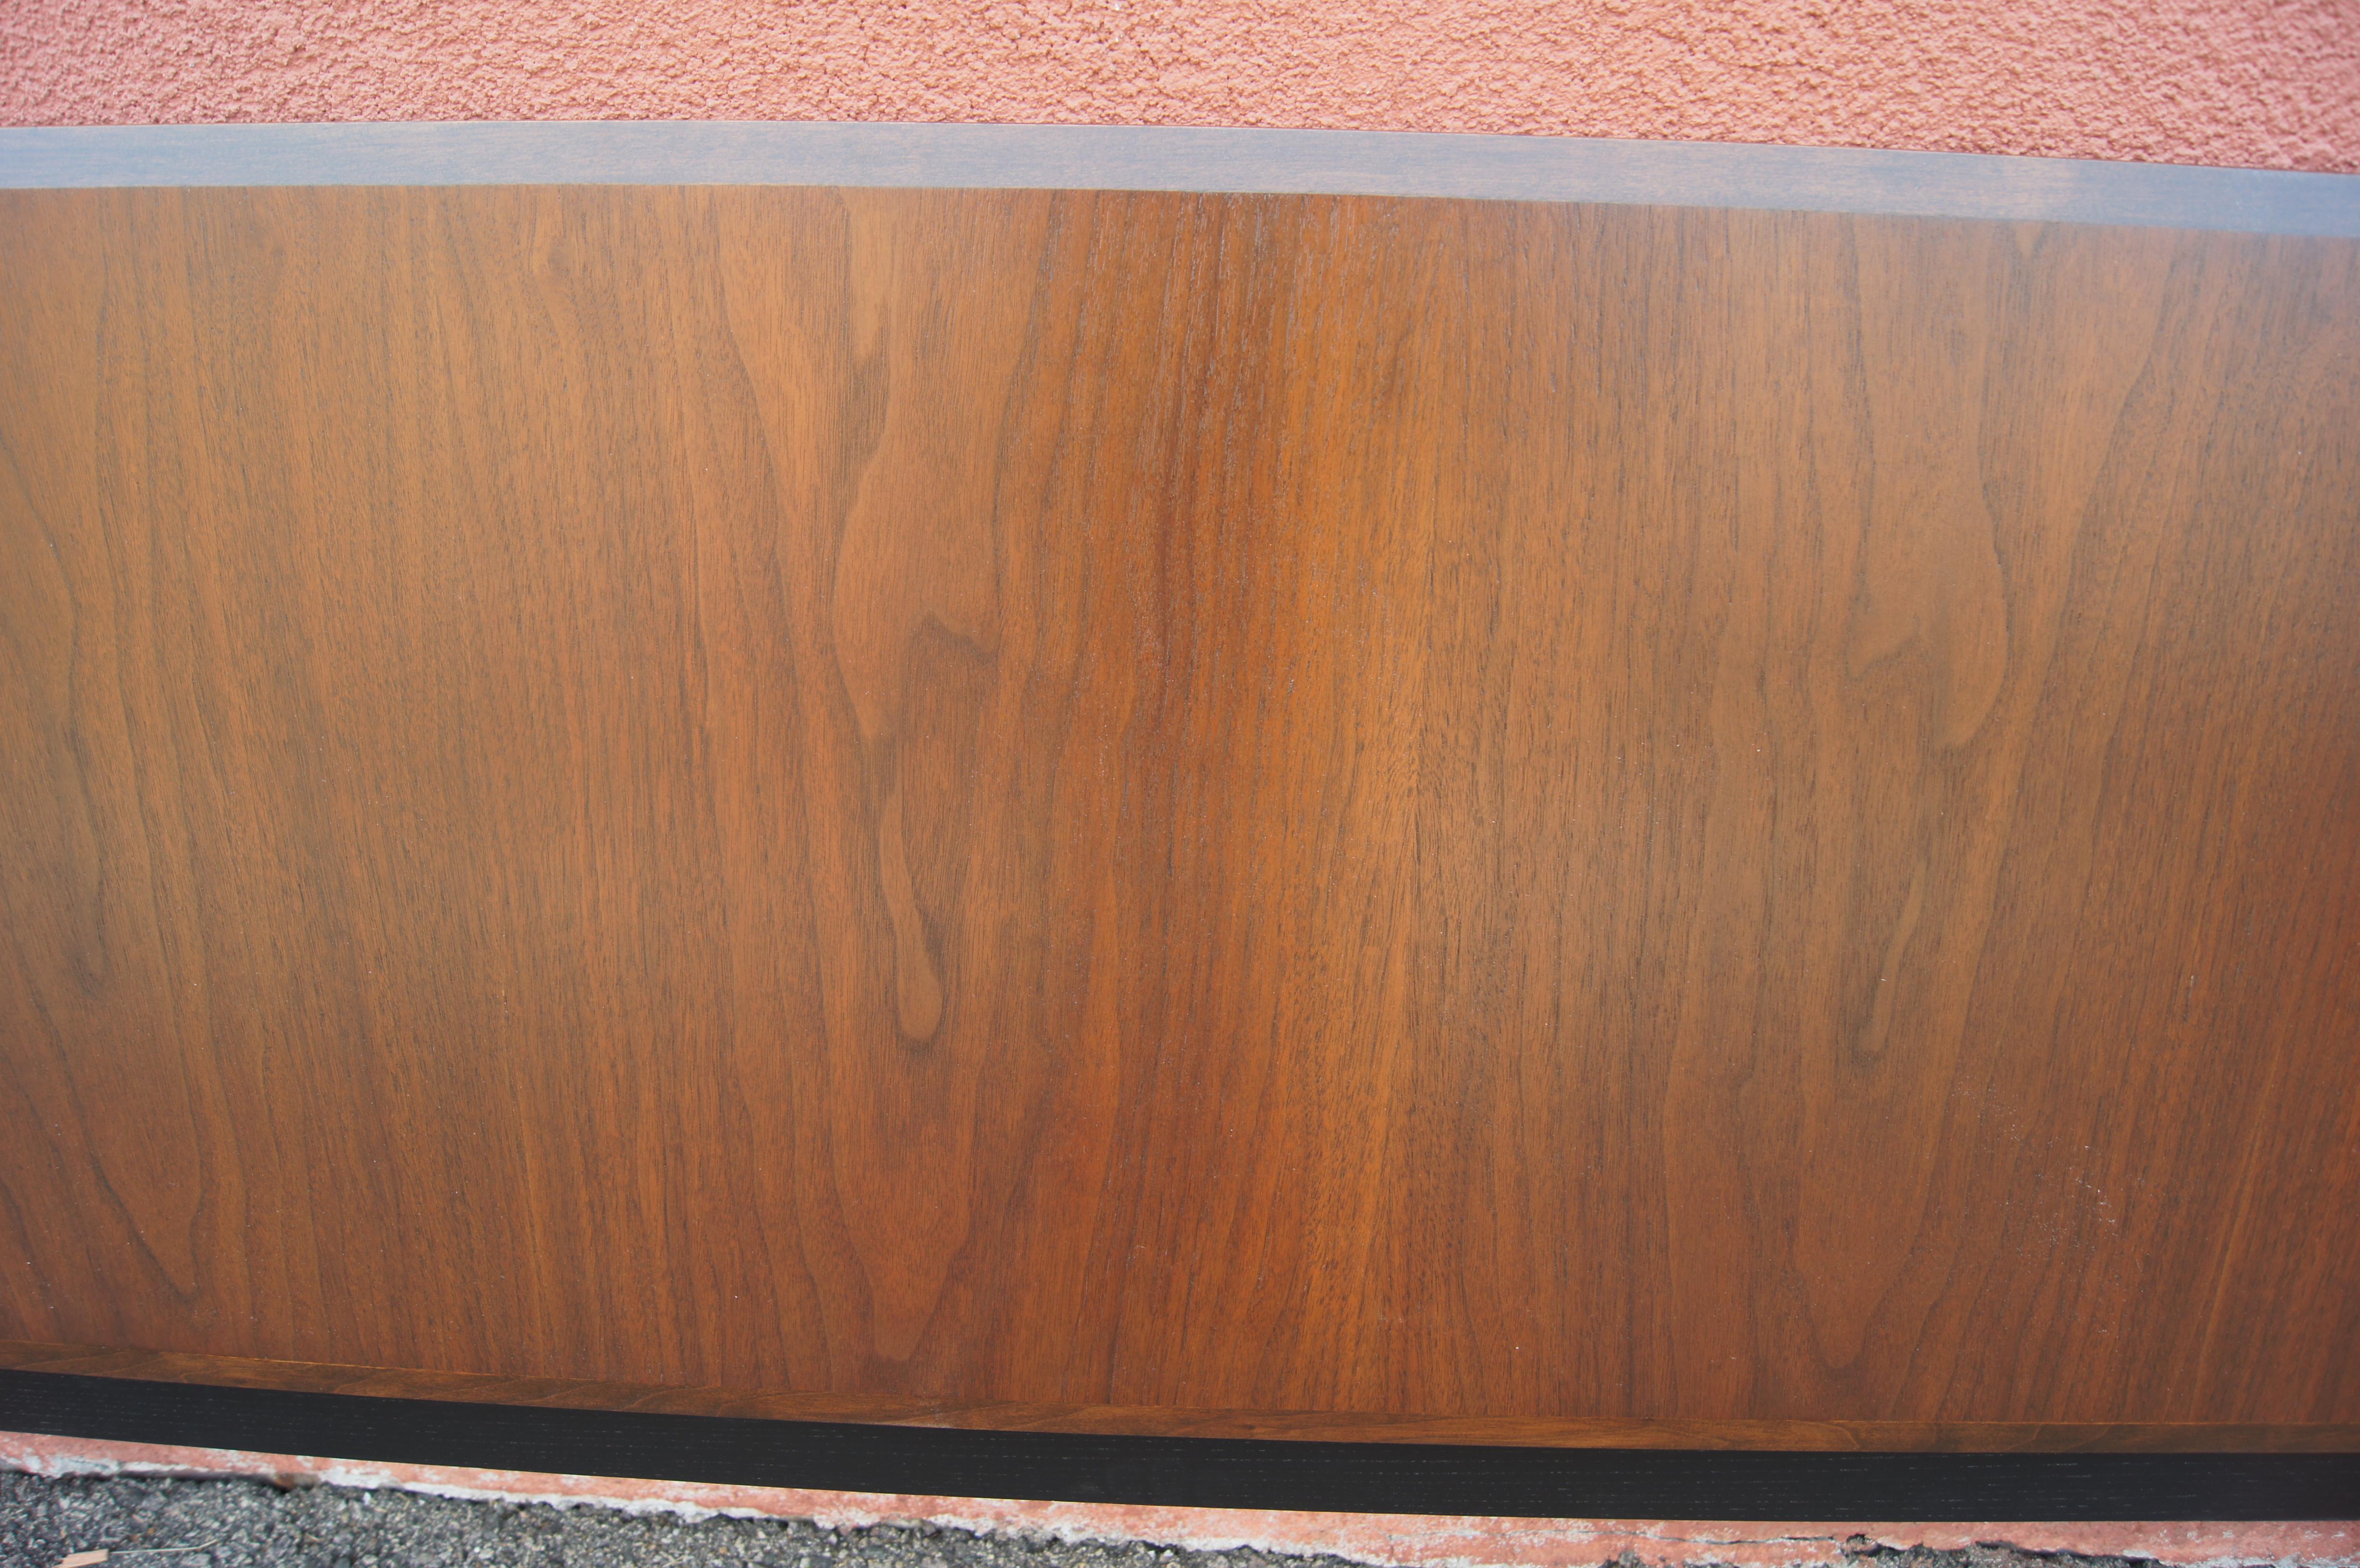 Mid-20th Century Midcentury Walnut King Headboard by Milo Baughman for Directional For Sale